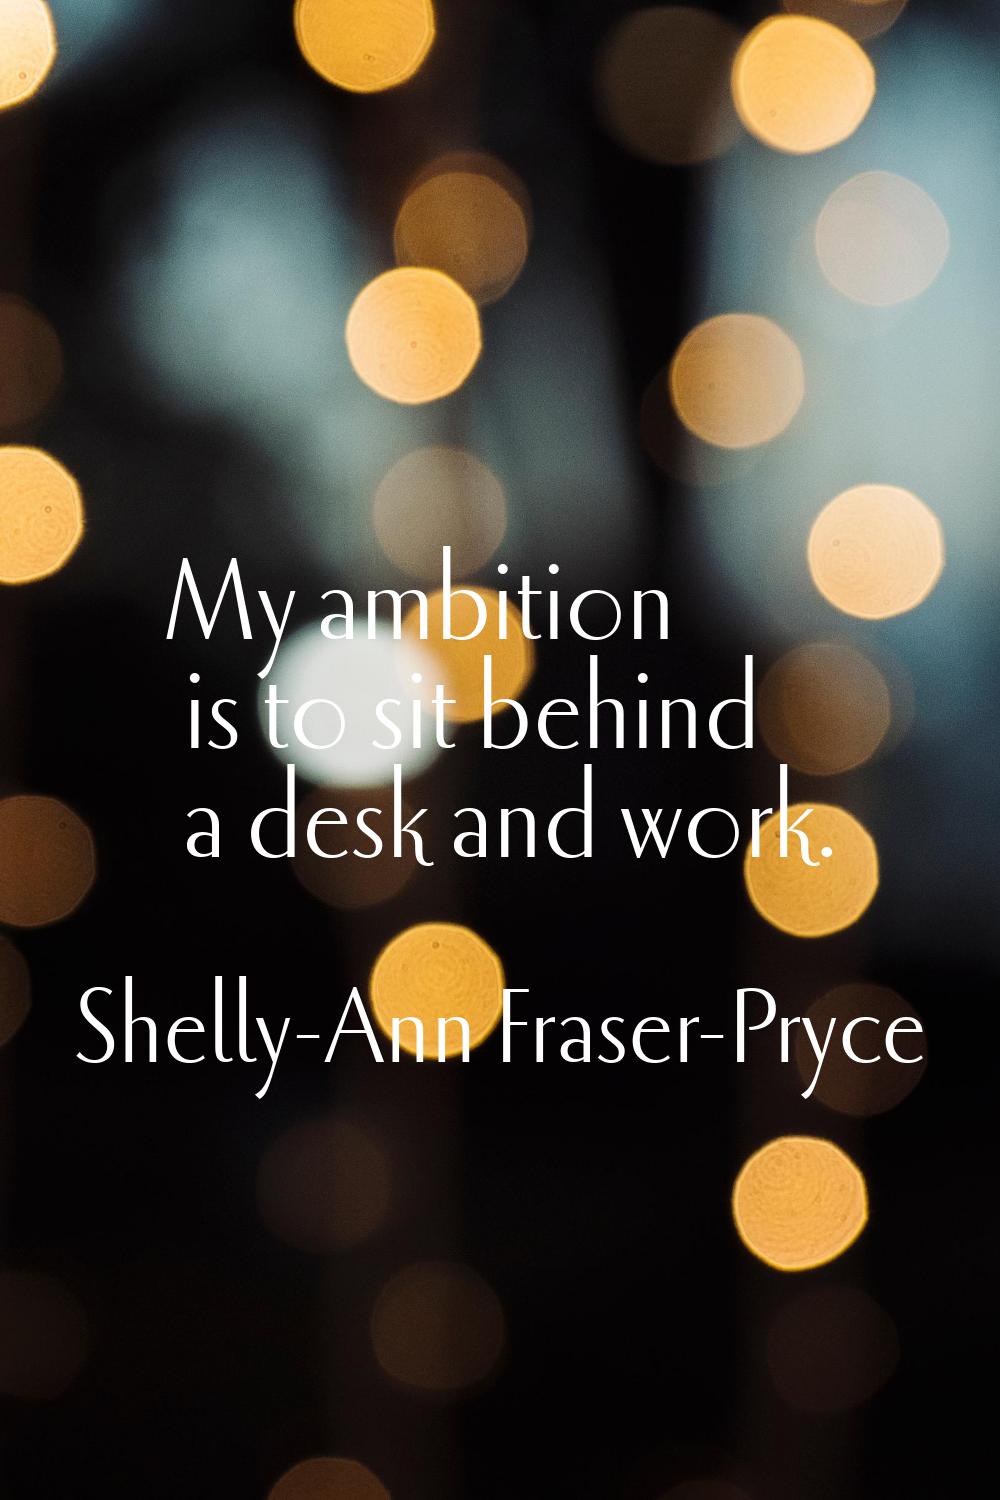 My ambition is to sit behind a desk and work.